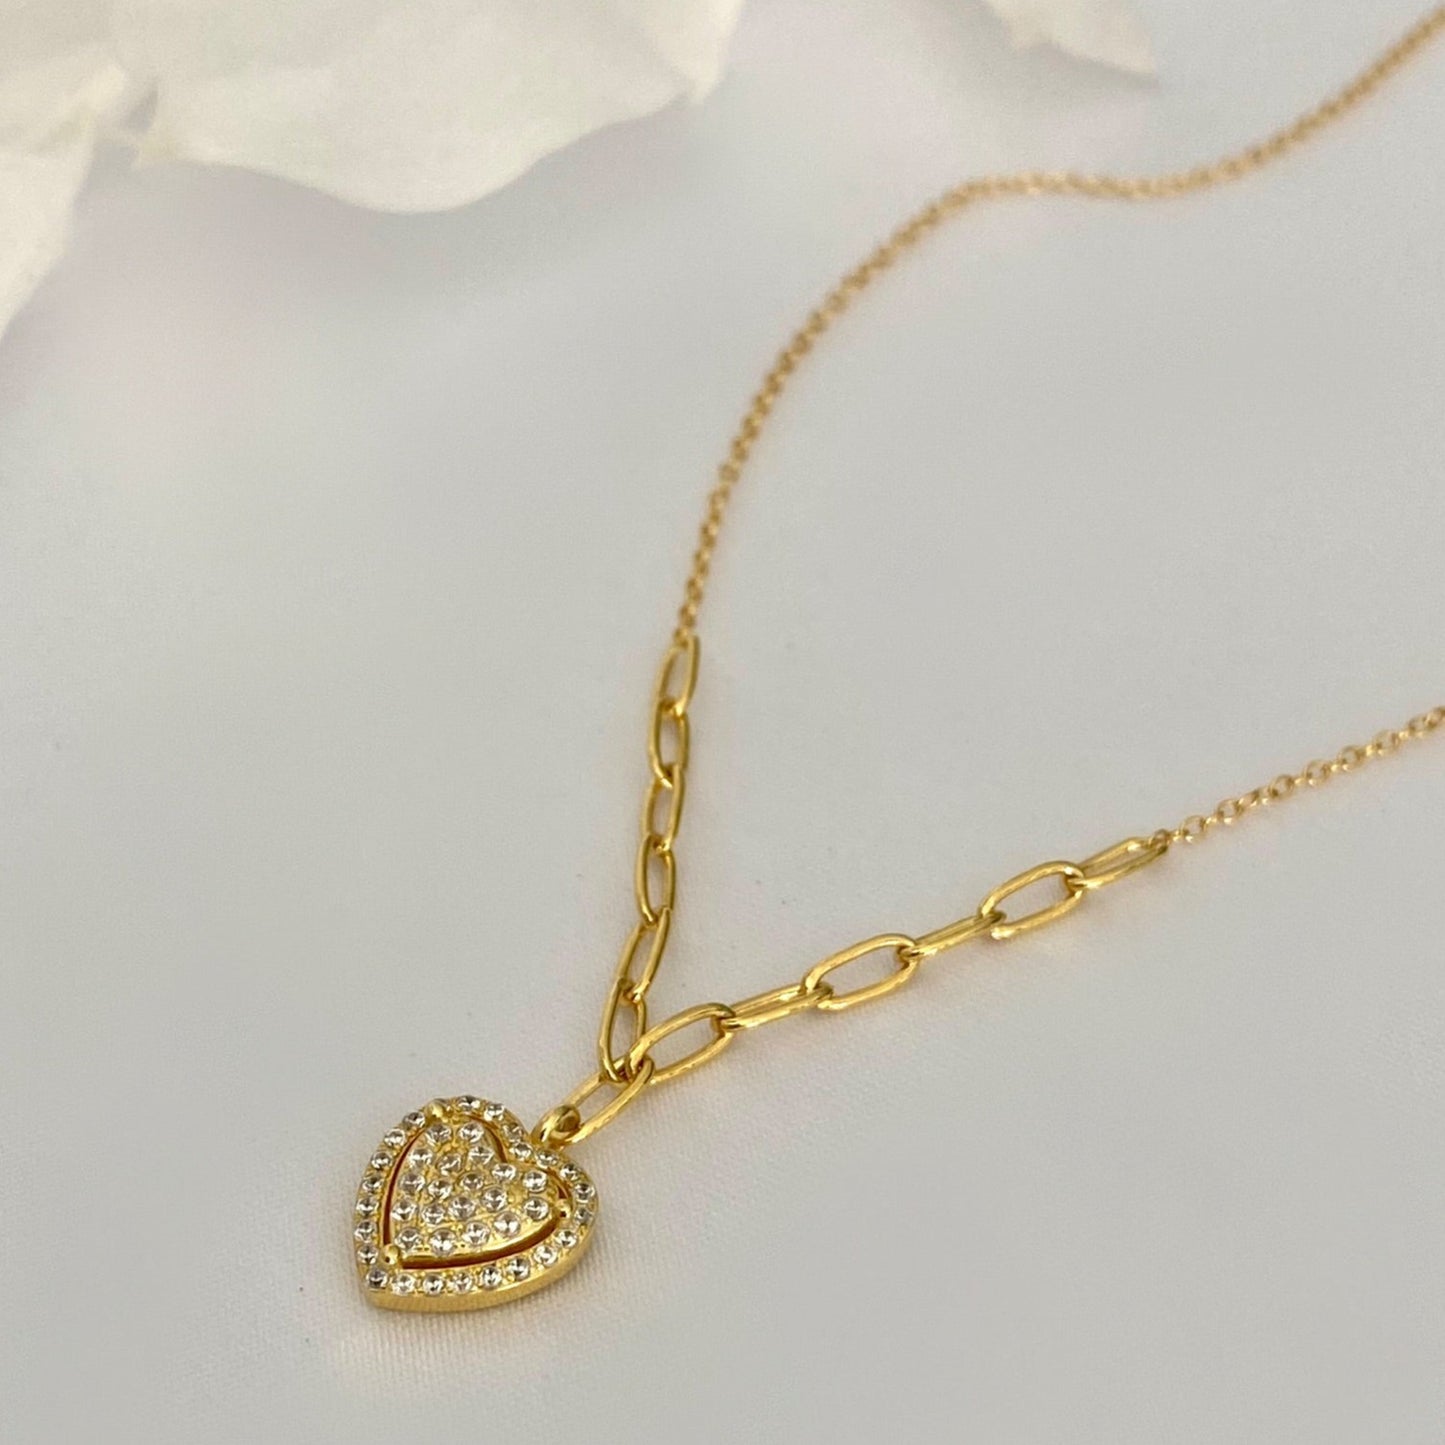 Dainty Love Heart Gold Necklace